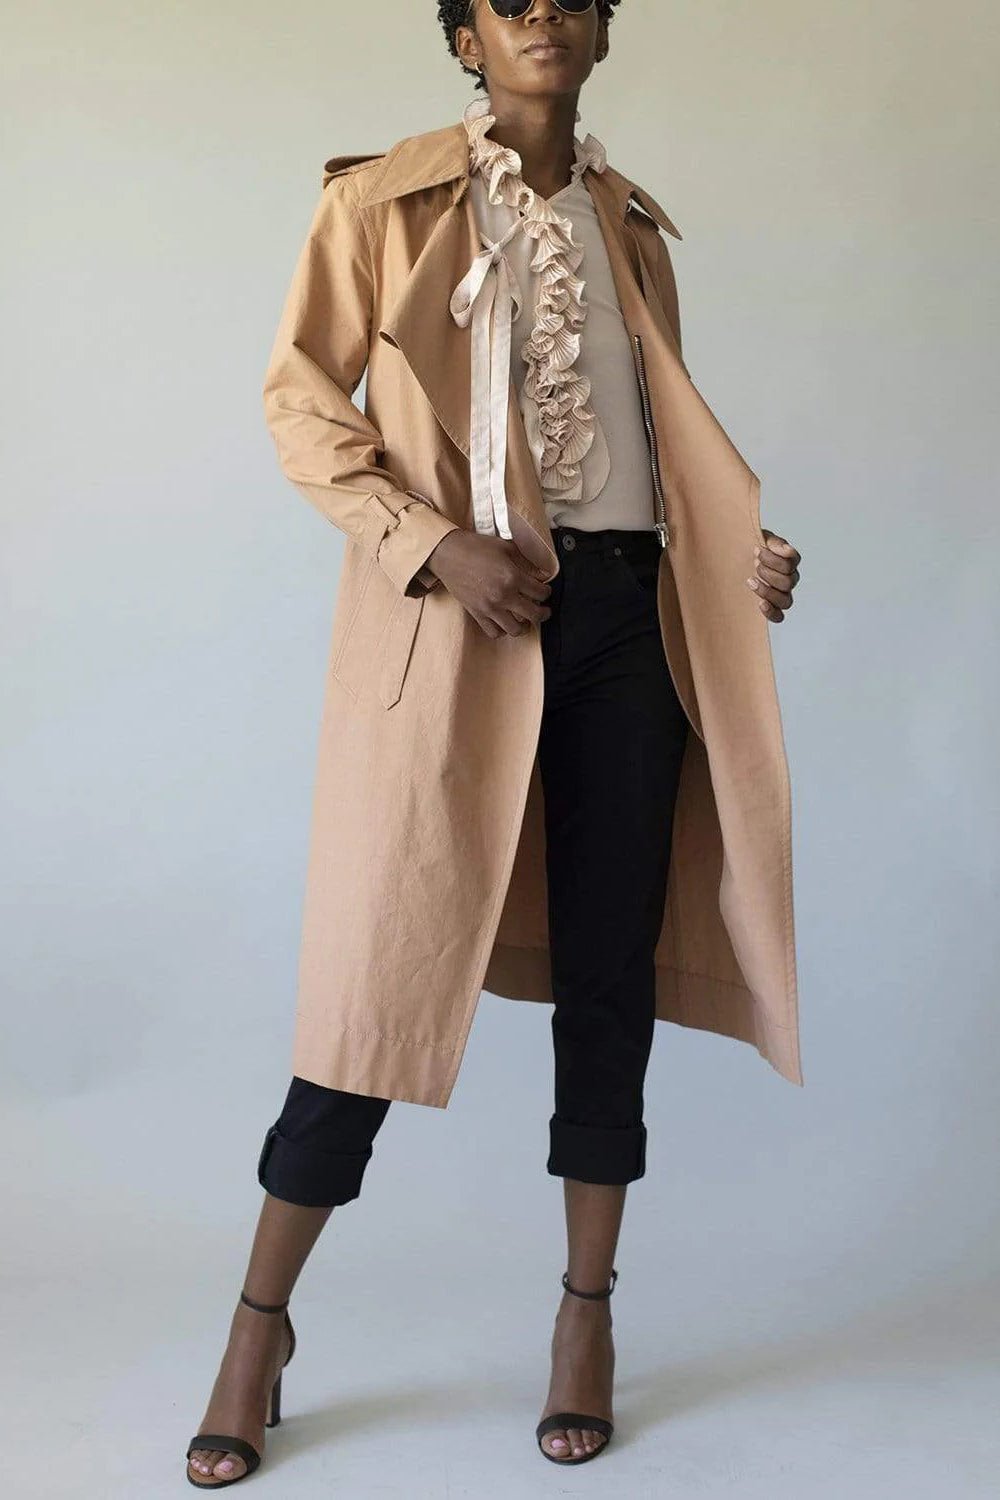 CEDRIC CHARLIER-Long Belted Trench Coat-CAMEL